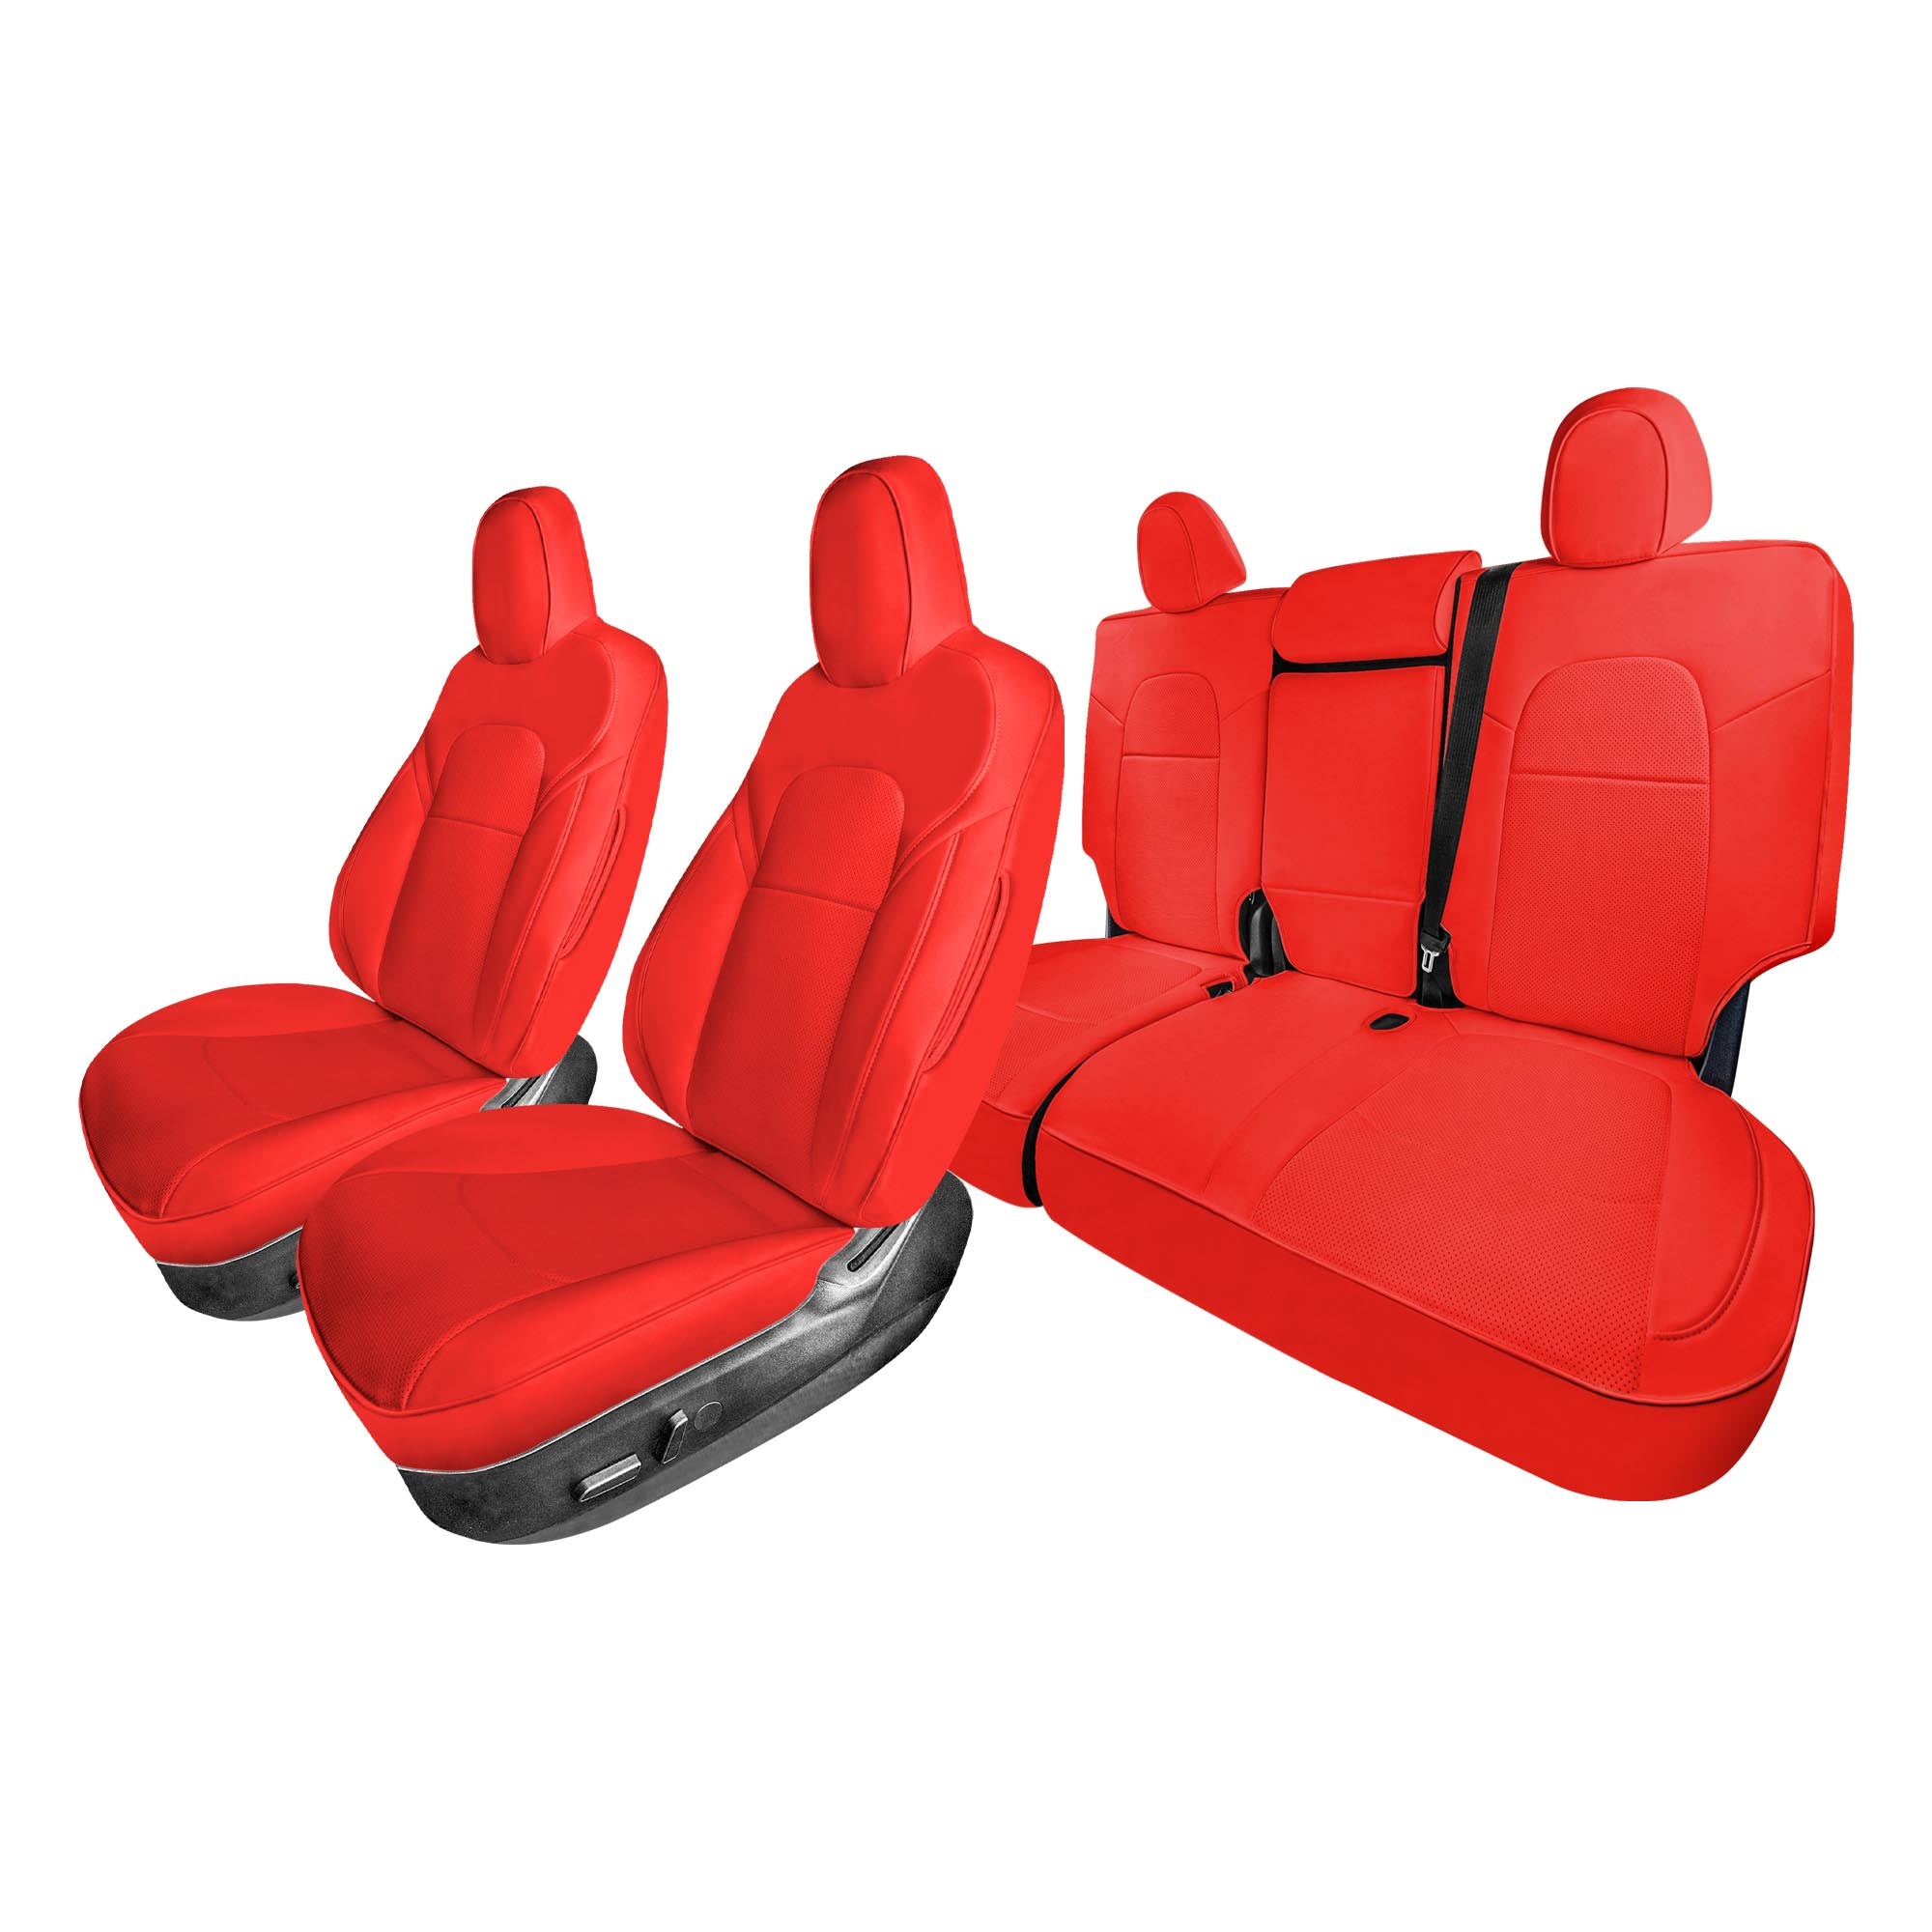 Tesla Model Y 2020 - 2022 - Full Set Seat Covers - Solid Red Faux Leather